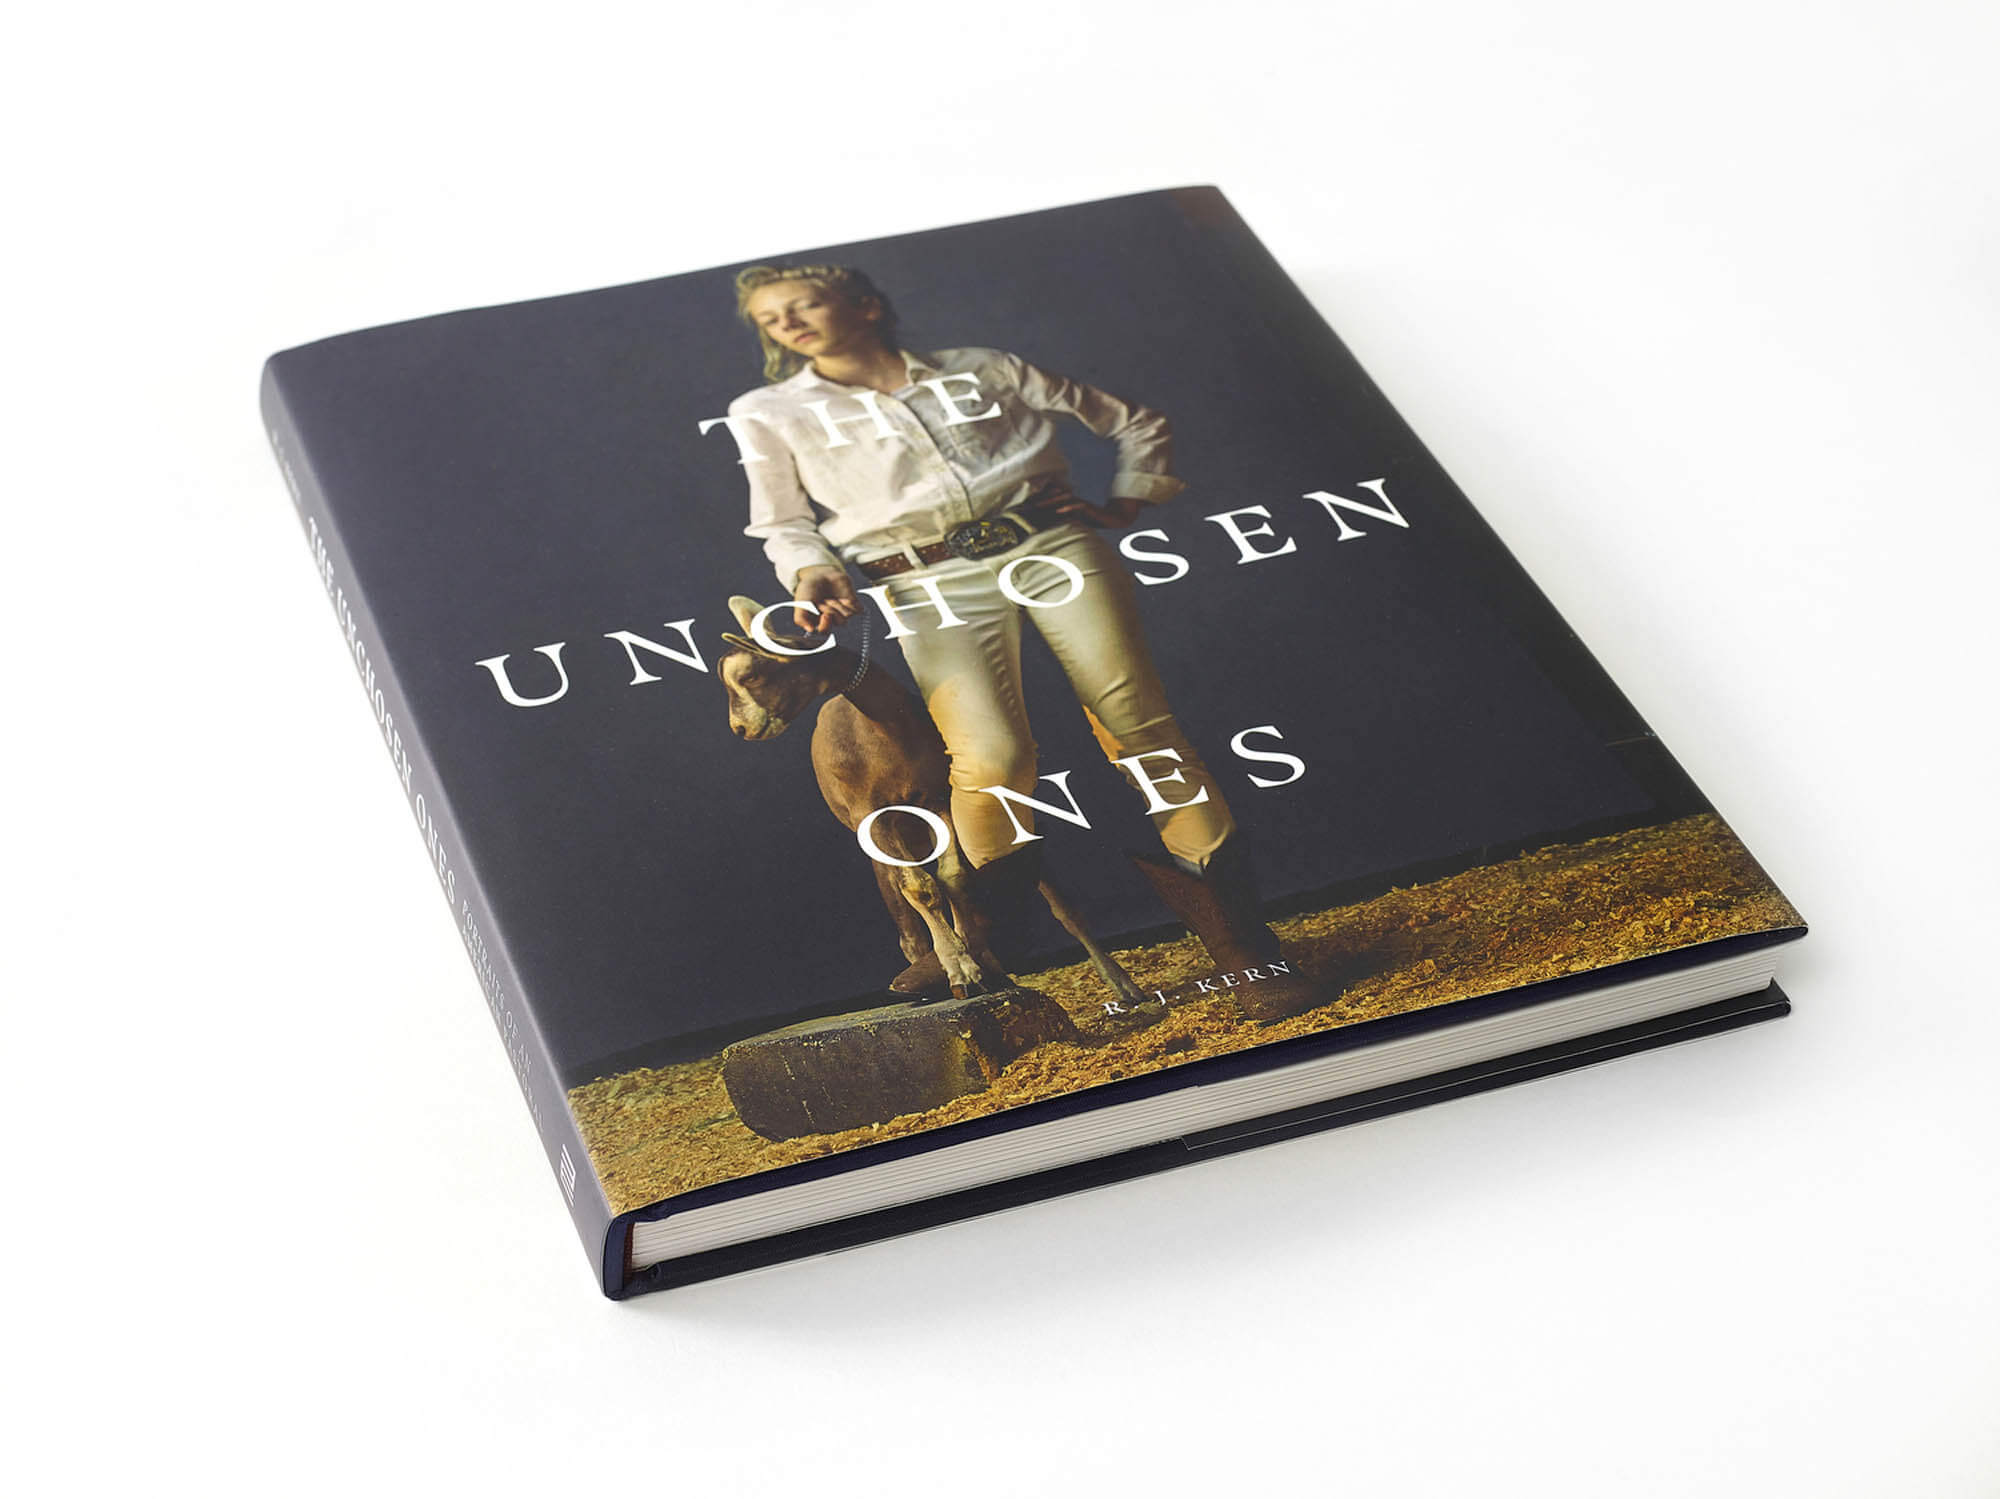 Book View: “The Unchosen Ones: Portraits of an American Pastoral” (MW Editions, 2021)